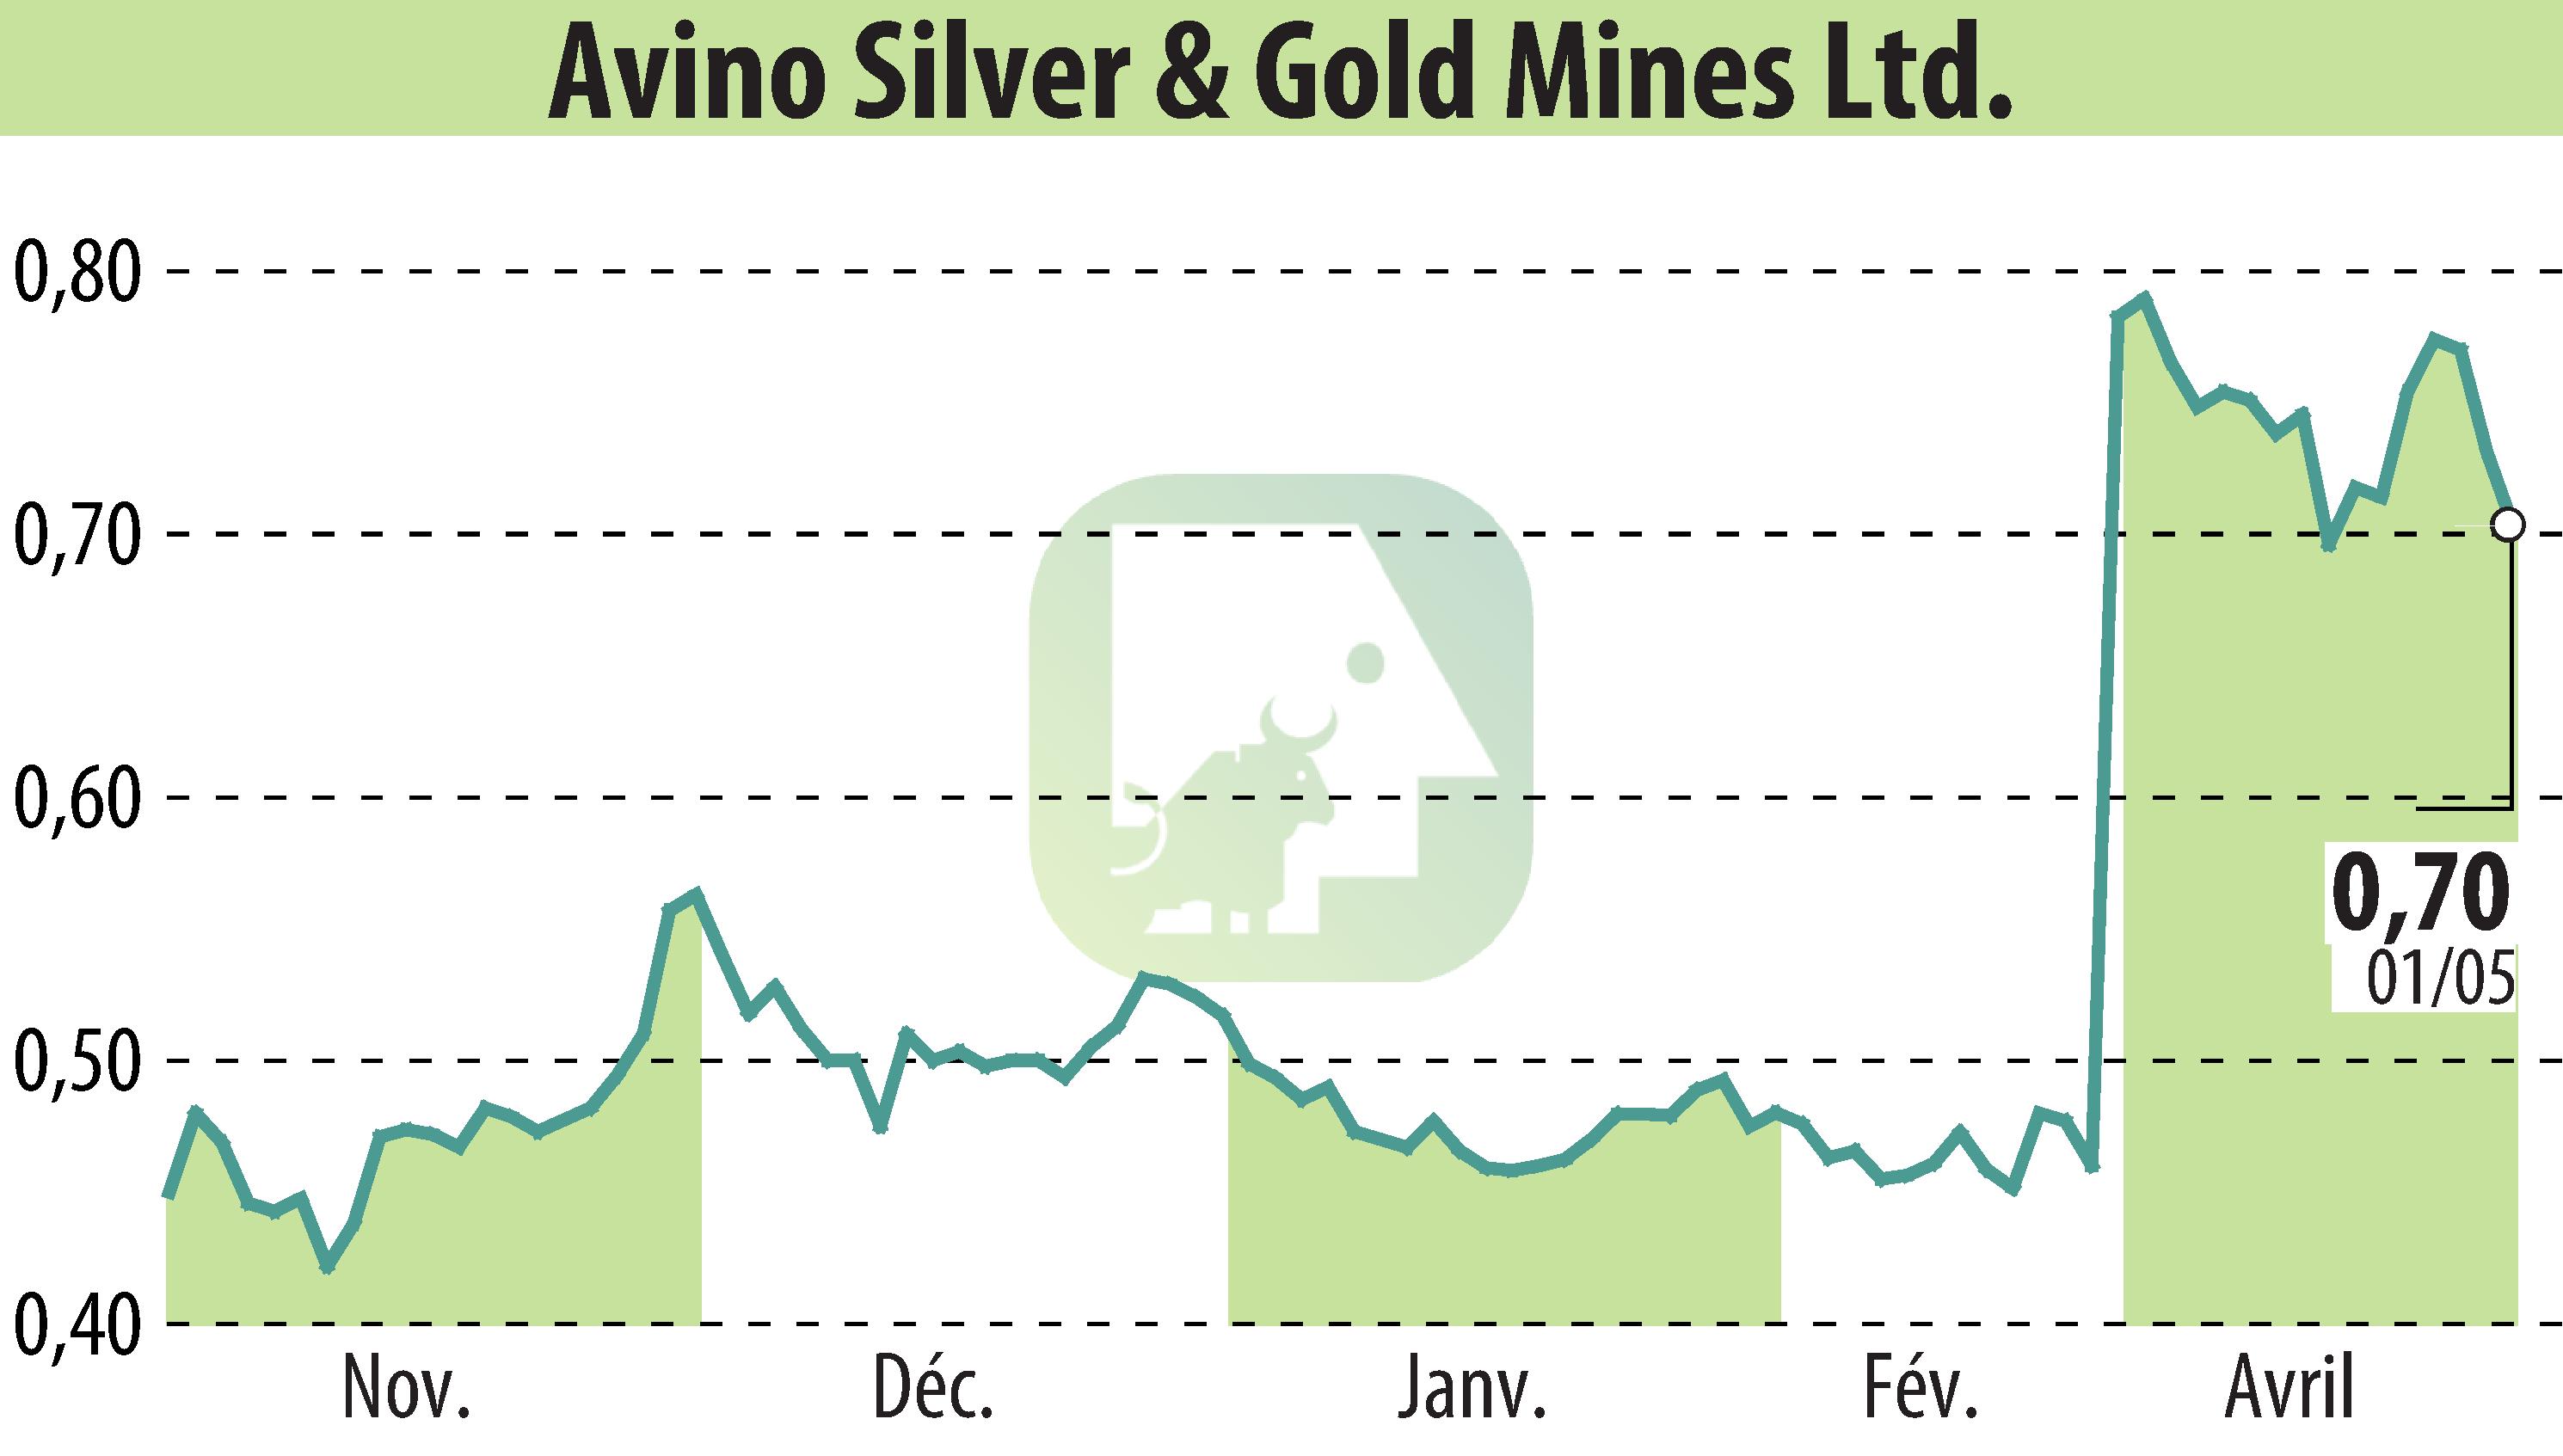 Stock price chart of Avino Silver & Gold Mines Ltd. (EBR:ASM) showing fluctuations.